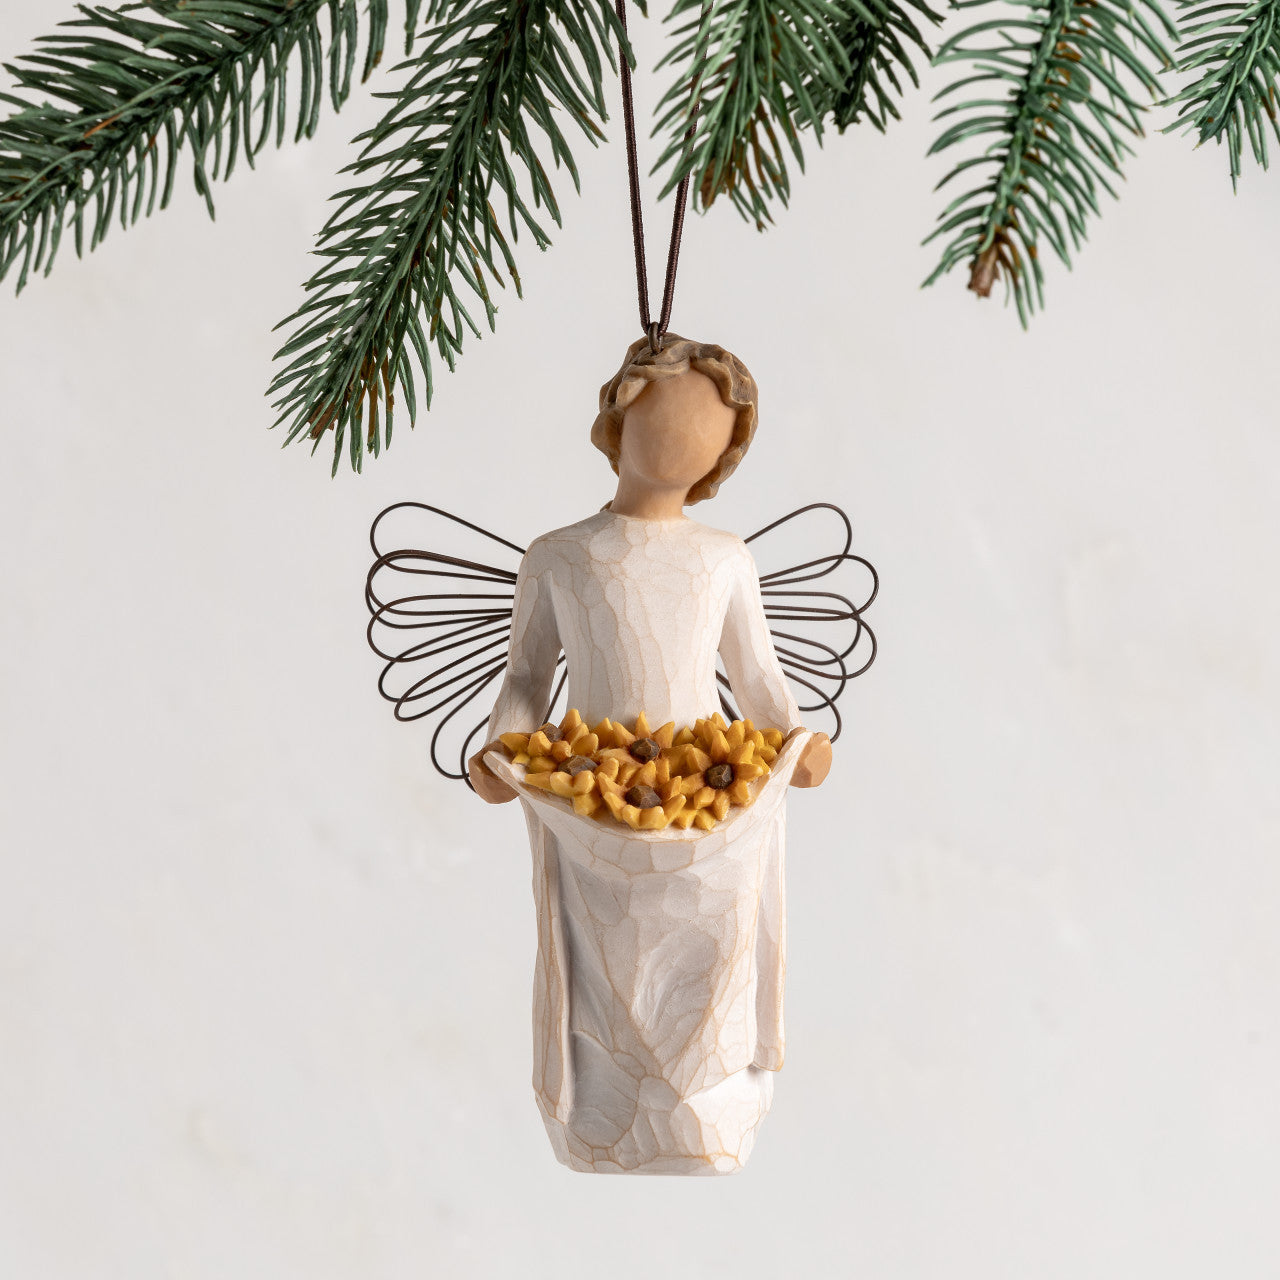 Willow Tree® Sunshine Ornament by Demdaco Ornament Willow Tree   